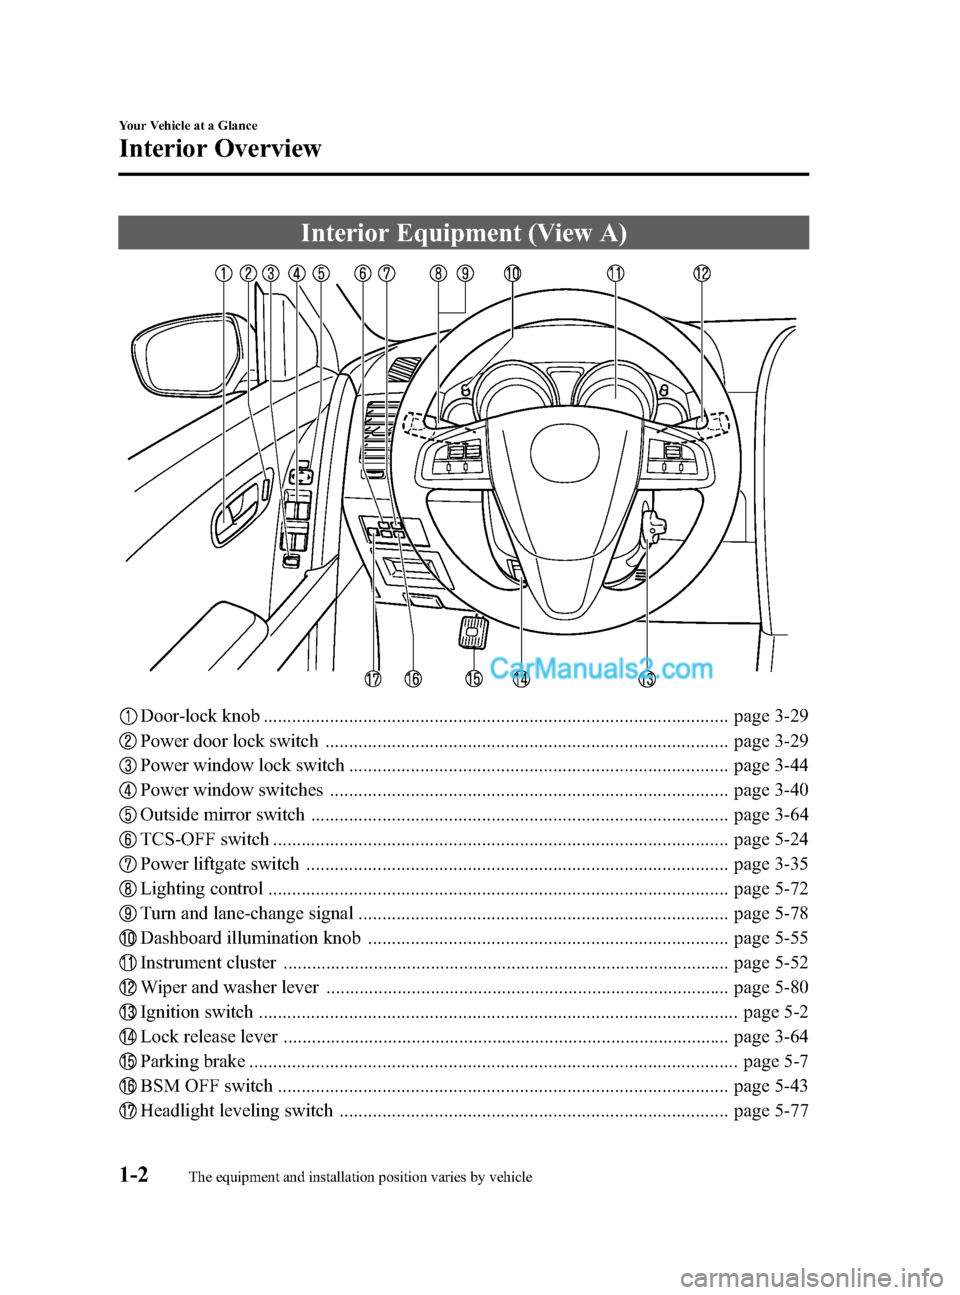 MAZDA MODEL CX-9 2014  Owners Manual (in English) Black plate (8,1)
Interior Equipment (View A)
Door-lock knob .................................................................................................. page 3-29
Power door lock switch .......